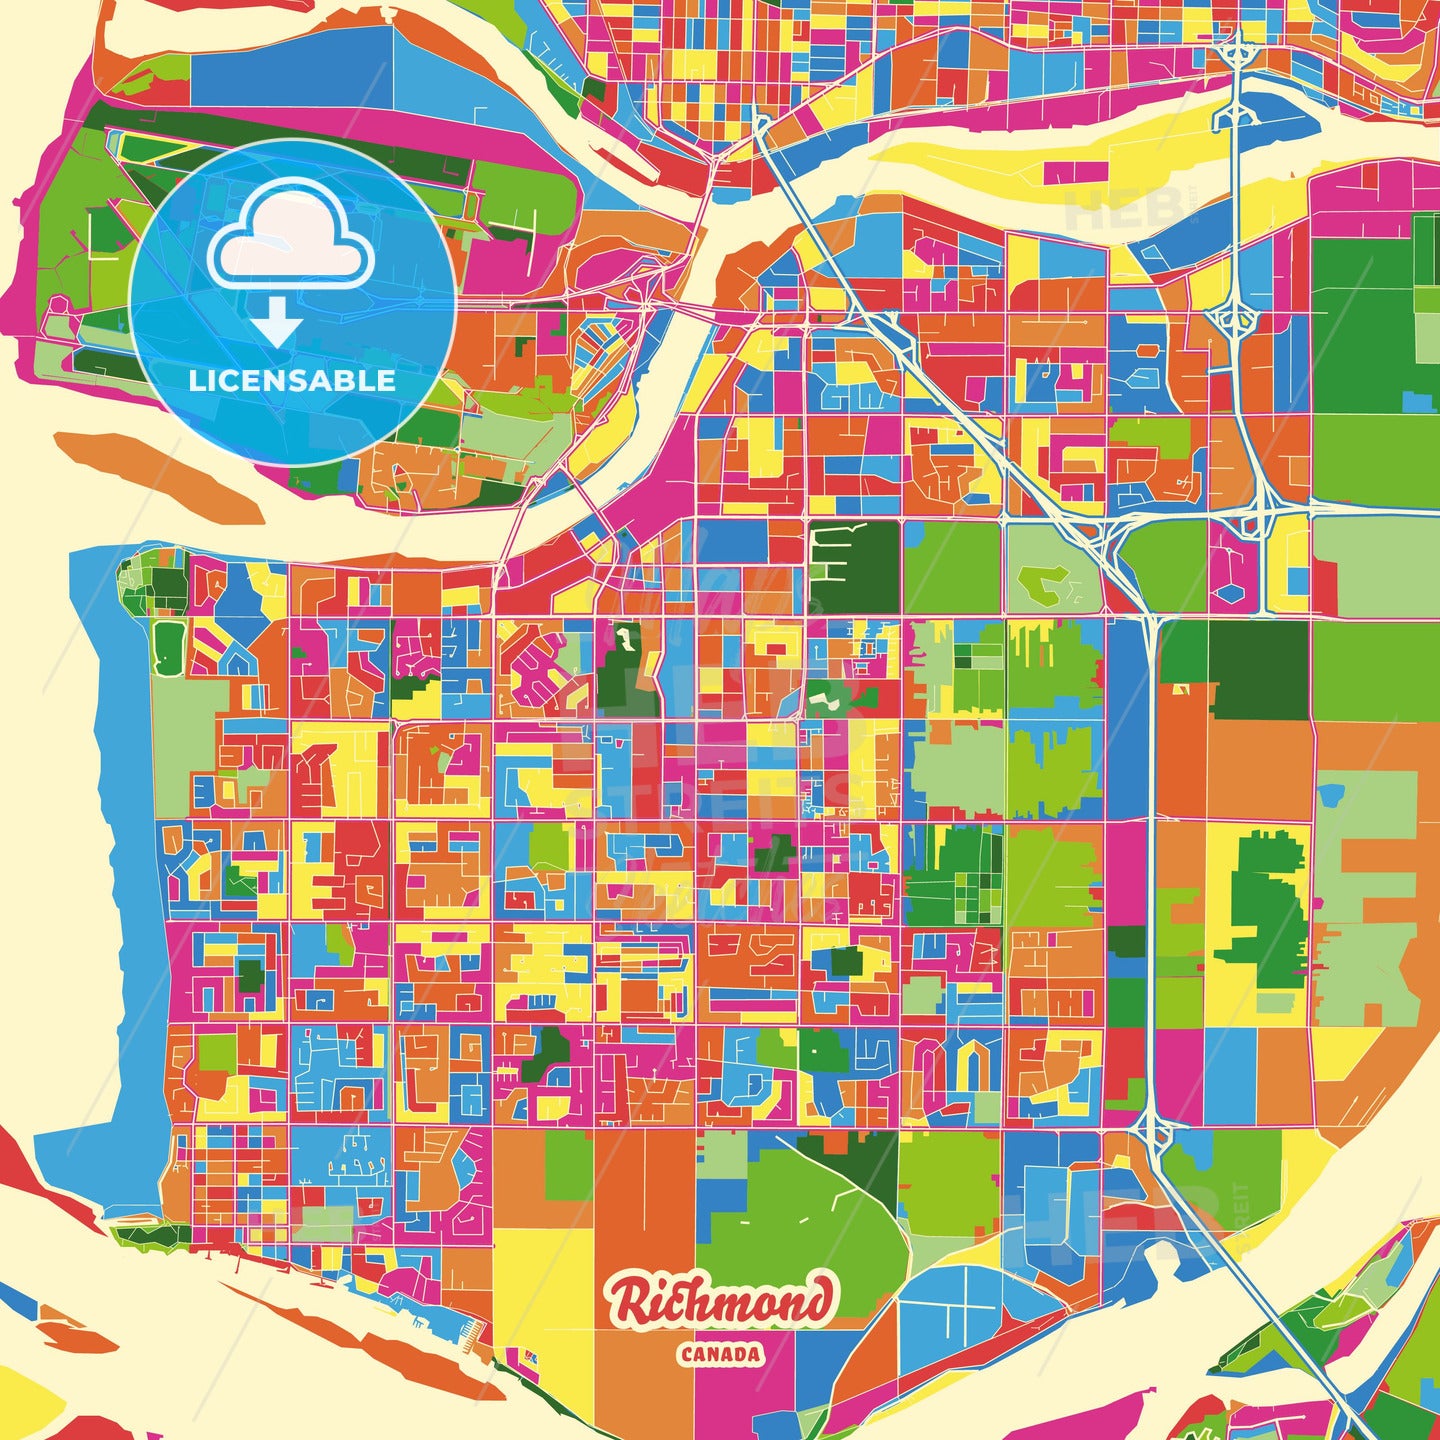 Richmond, Canada Crazy Colorful Street Map Poster Template - HEBSTREITS Sketches